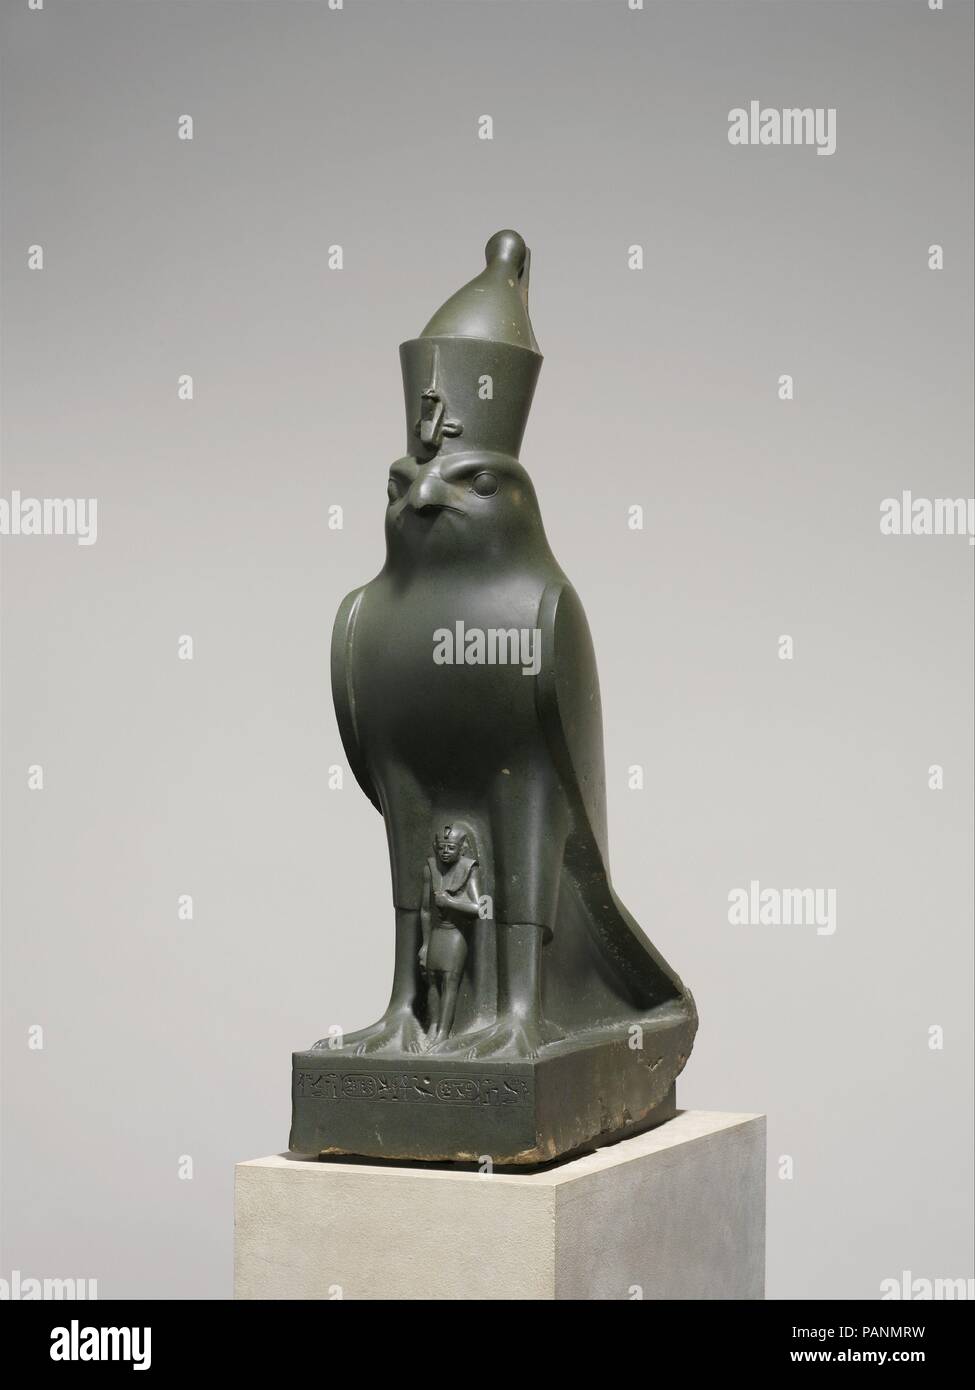 God Horus Protecting King Nectanebo II. Dimensions: H. 72 cm (28 3/8 in.); W. 20 cm (7 7/8 in.); D. 46.5 cm (18 5/16 in.). Dynasty: Dynasty 30. Reign: reign of Nectanebo II. Date: 360-343 B.C..  The pharaoh Nectanebo II often invoked a very close connection-even a merging-between himself and the falcon god of kingship, Horus.  In fact, Nectanebo II was the focus of a cult in which he was referred to as 'Nectanebo-the-Falcon,' which could indeed be what is represented by this striking conjunction of a powerful falcon and the monarch. This idea seems to be supported by the fact that Horus is not Stock Photo